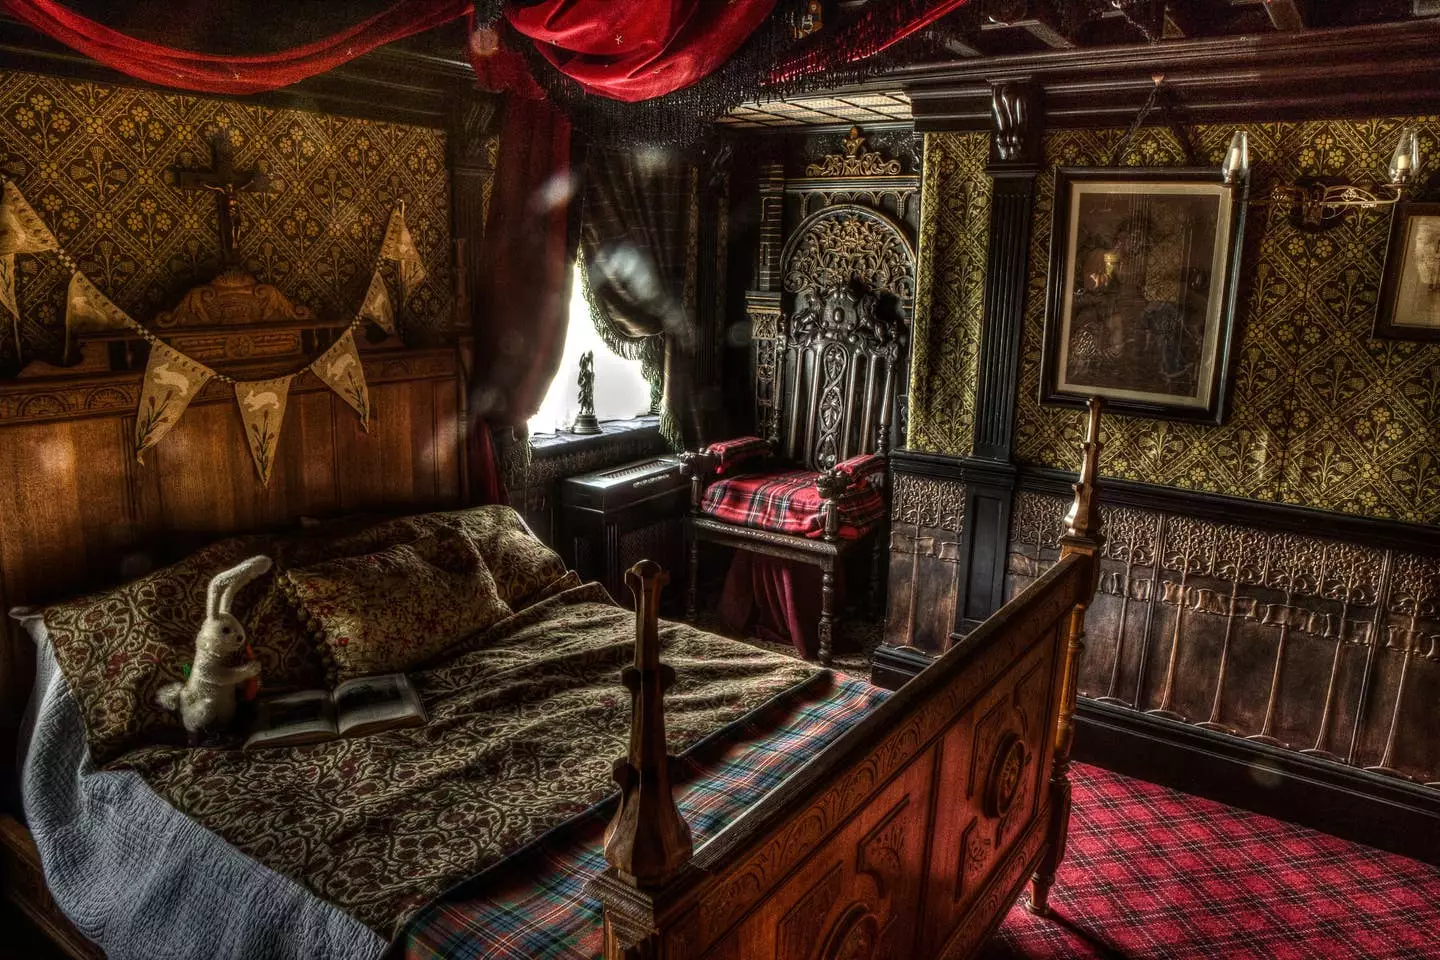 The terrifying room is not for the faint hearted (